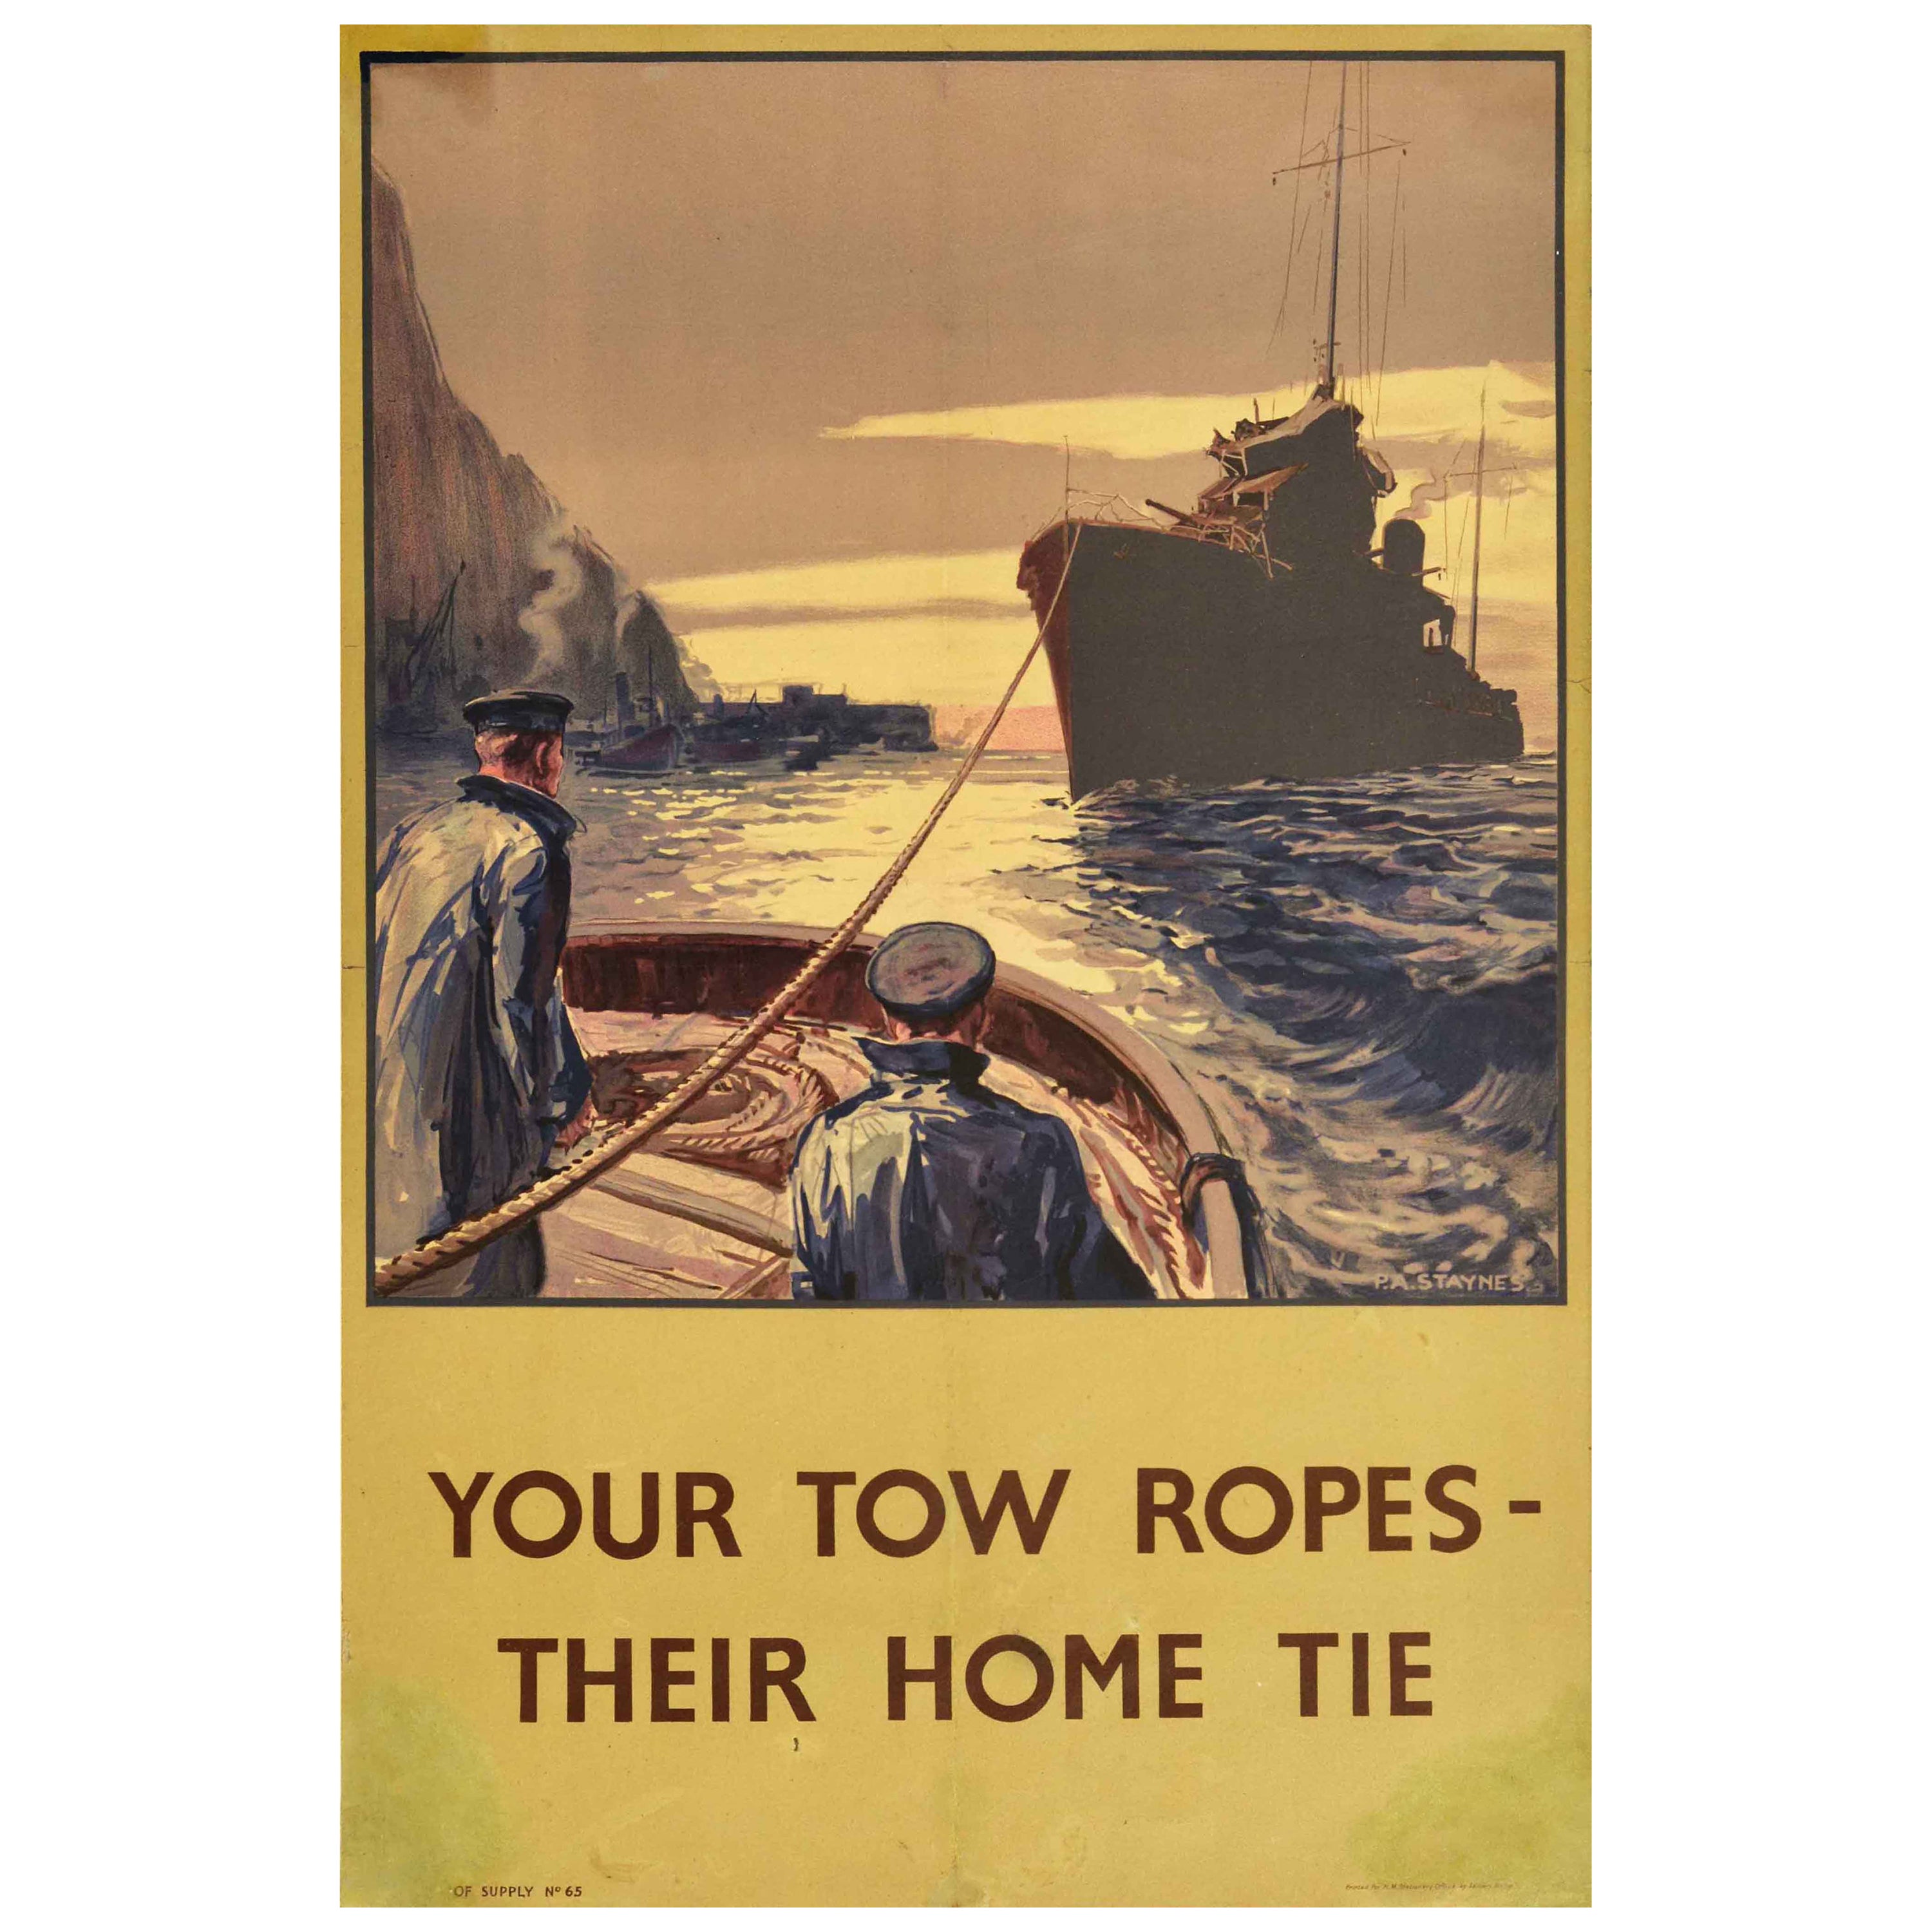 Original Vintage British War Poster - Your Tow Ropes Their Home Tie - WWII Navy